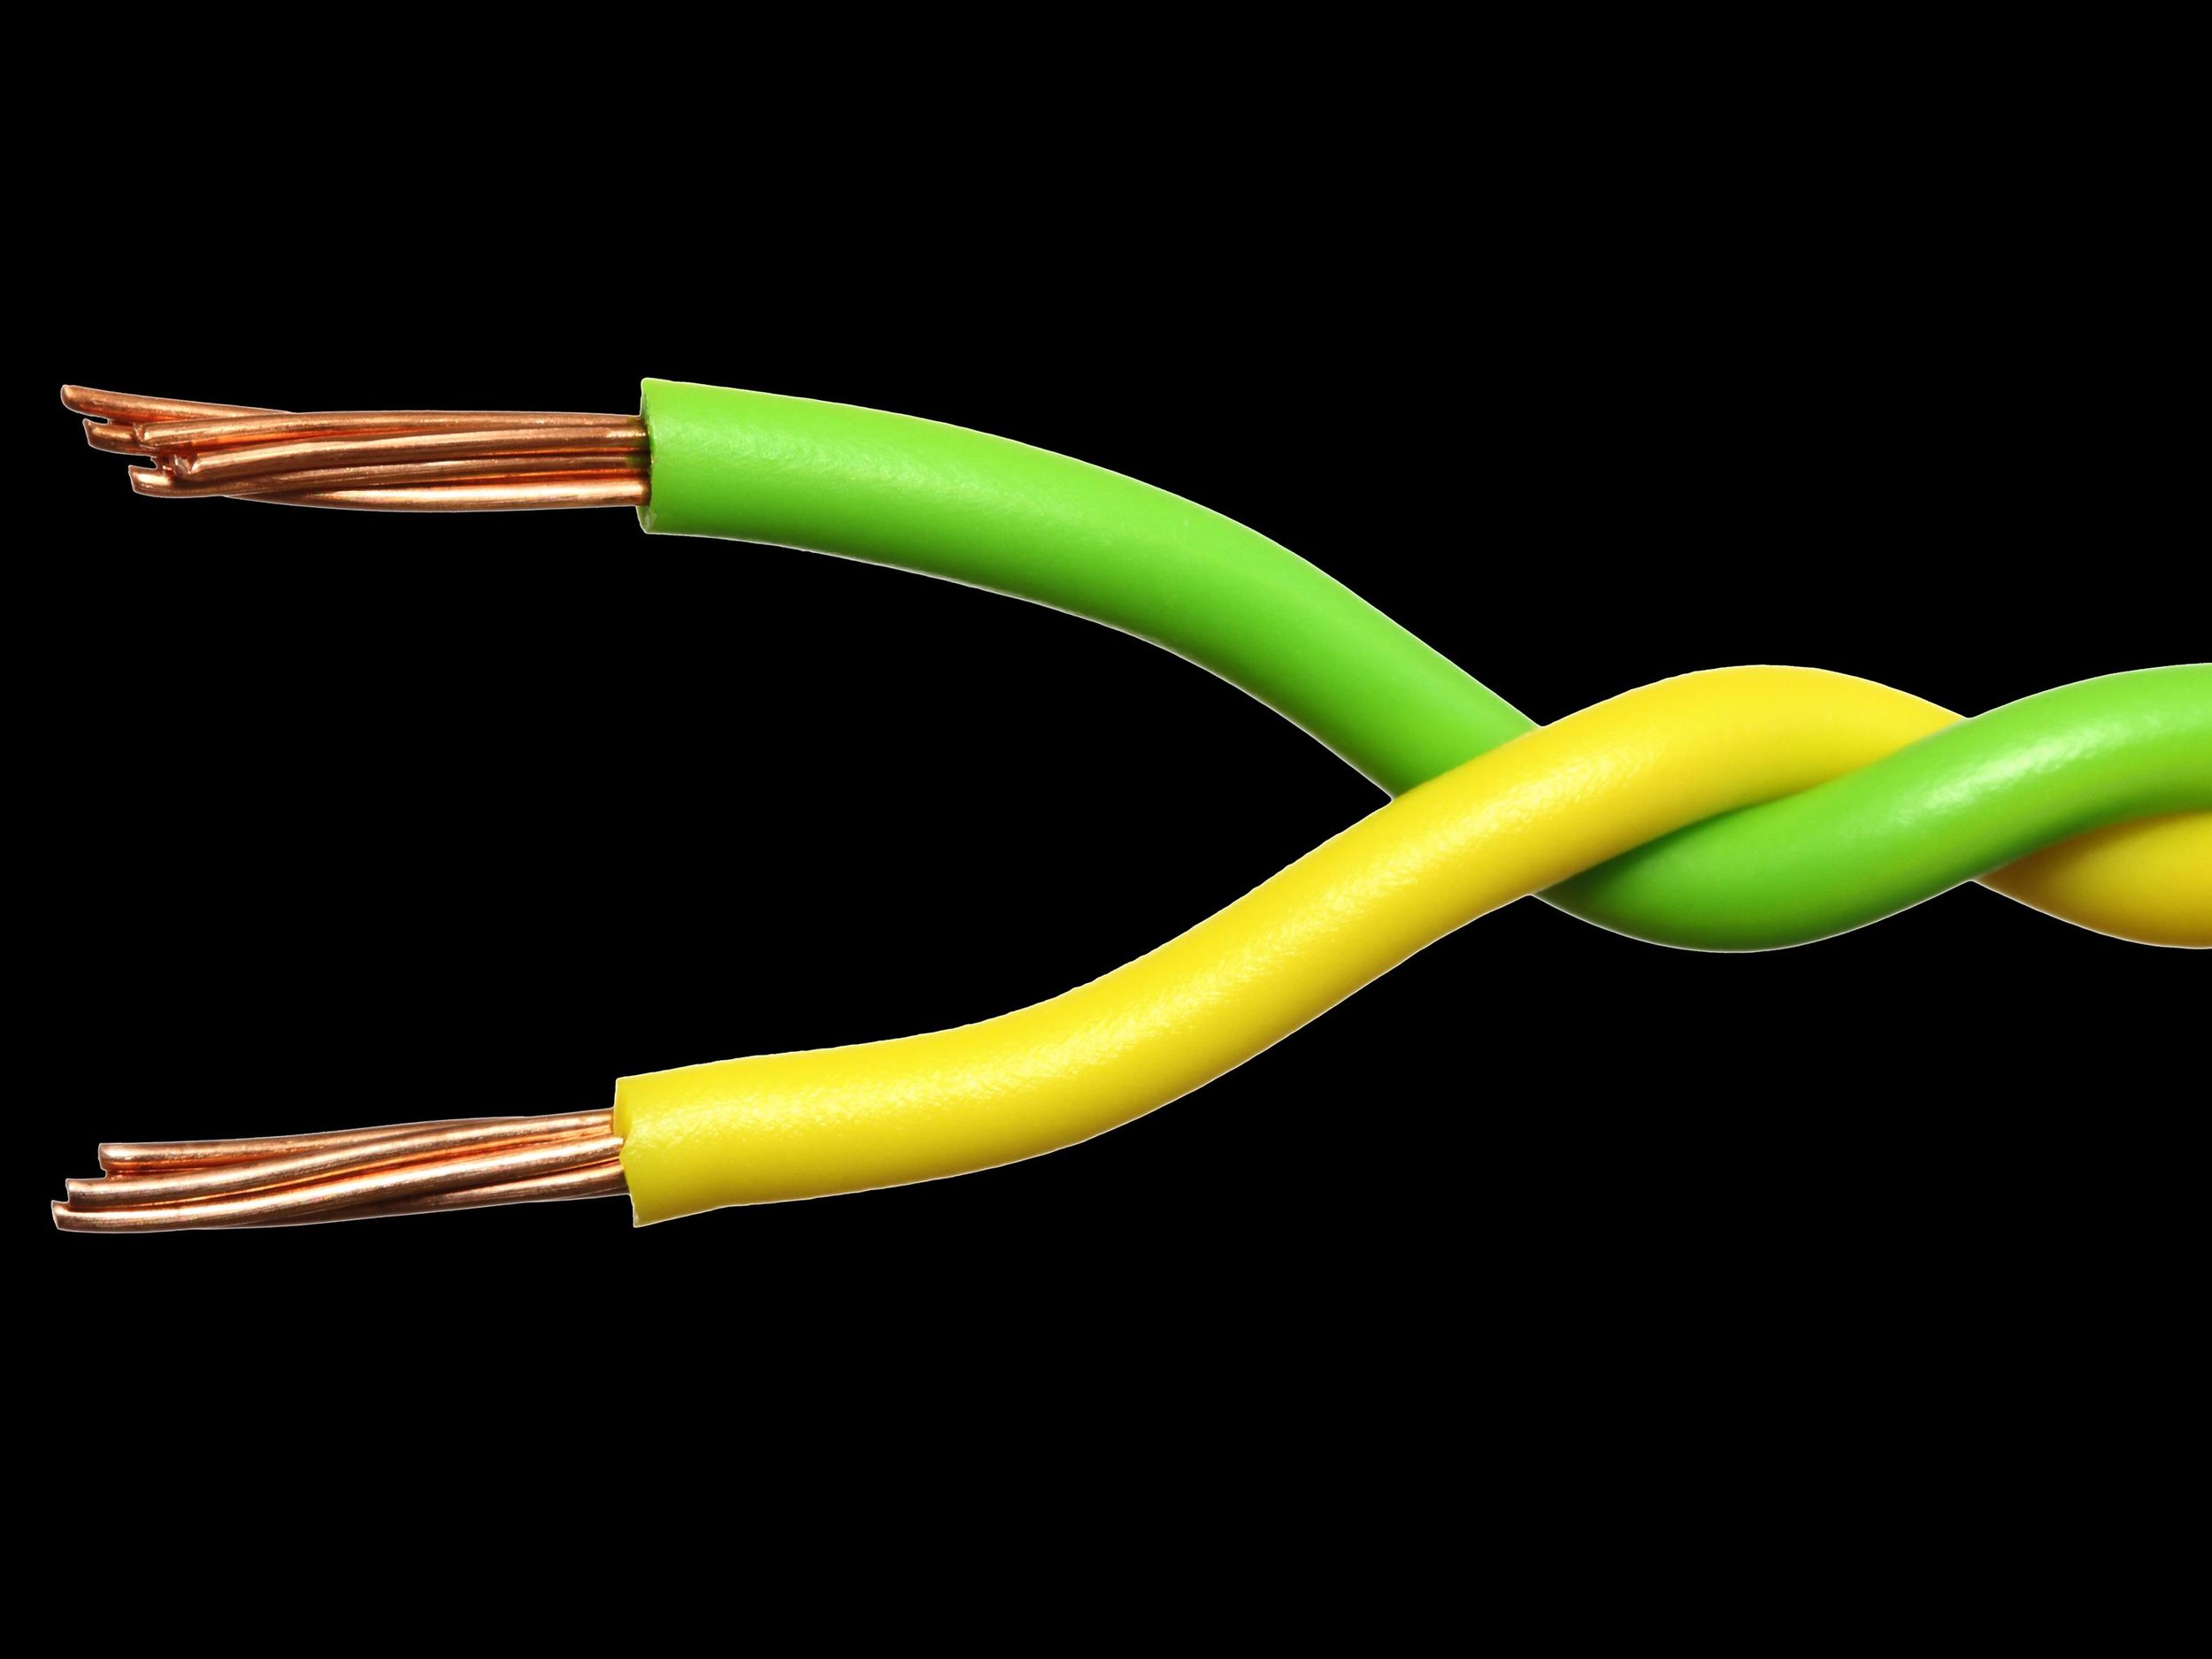 A pair of twisted copper cables with green and yellow insulation